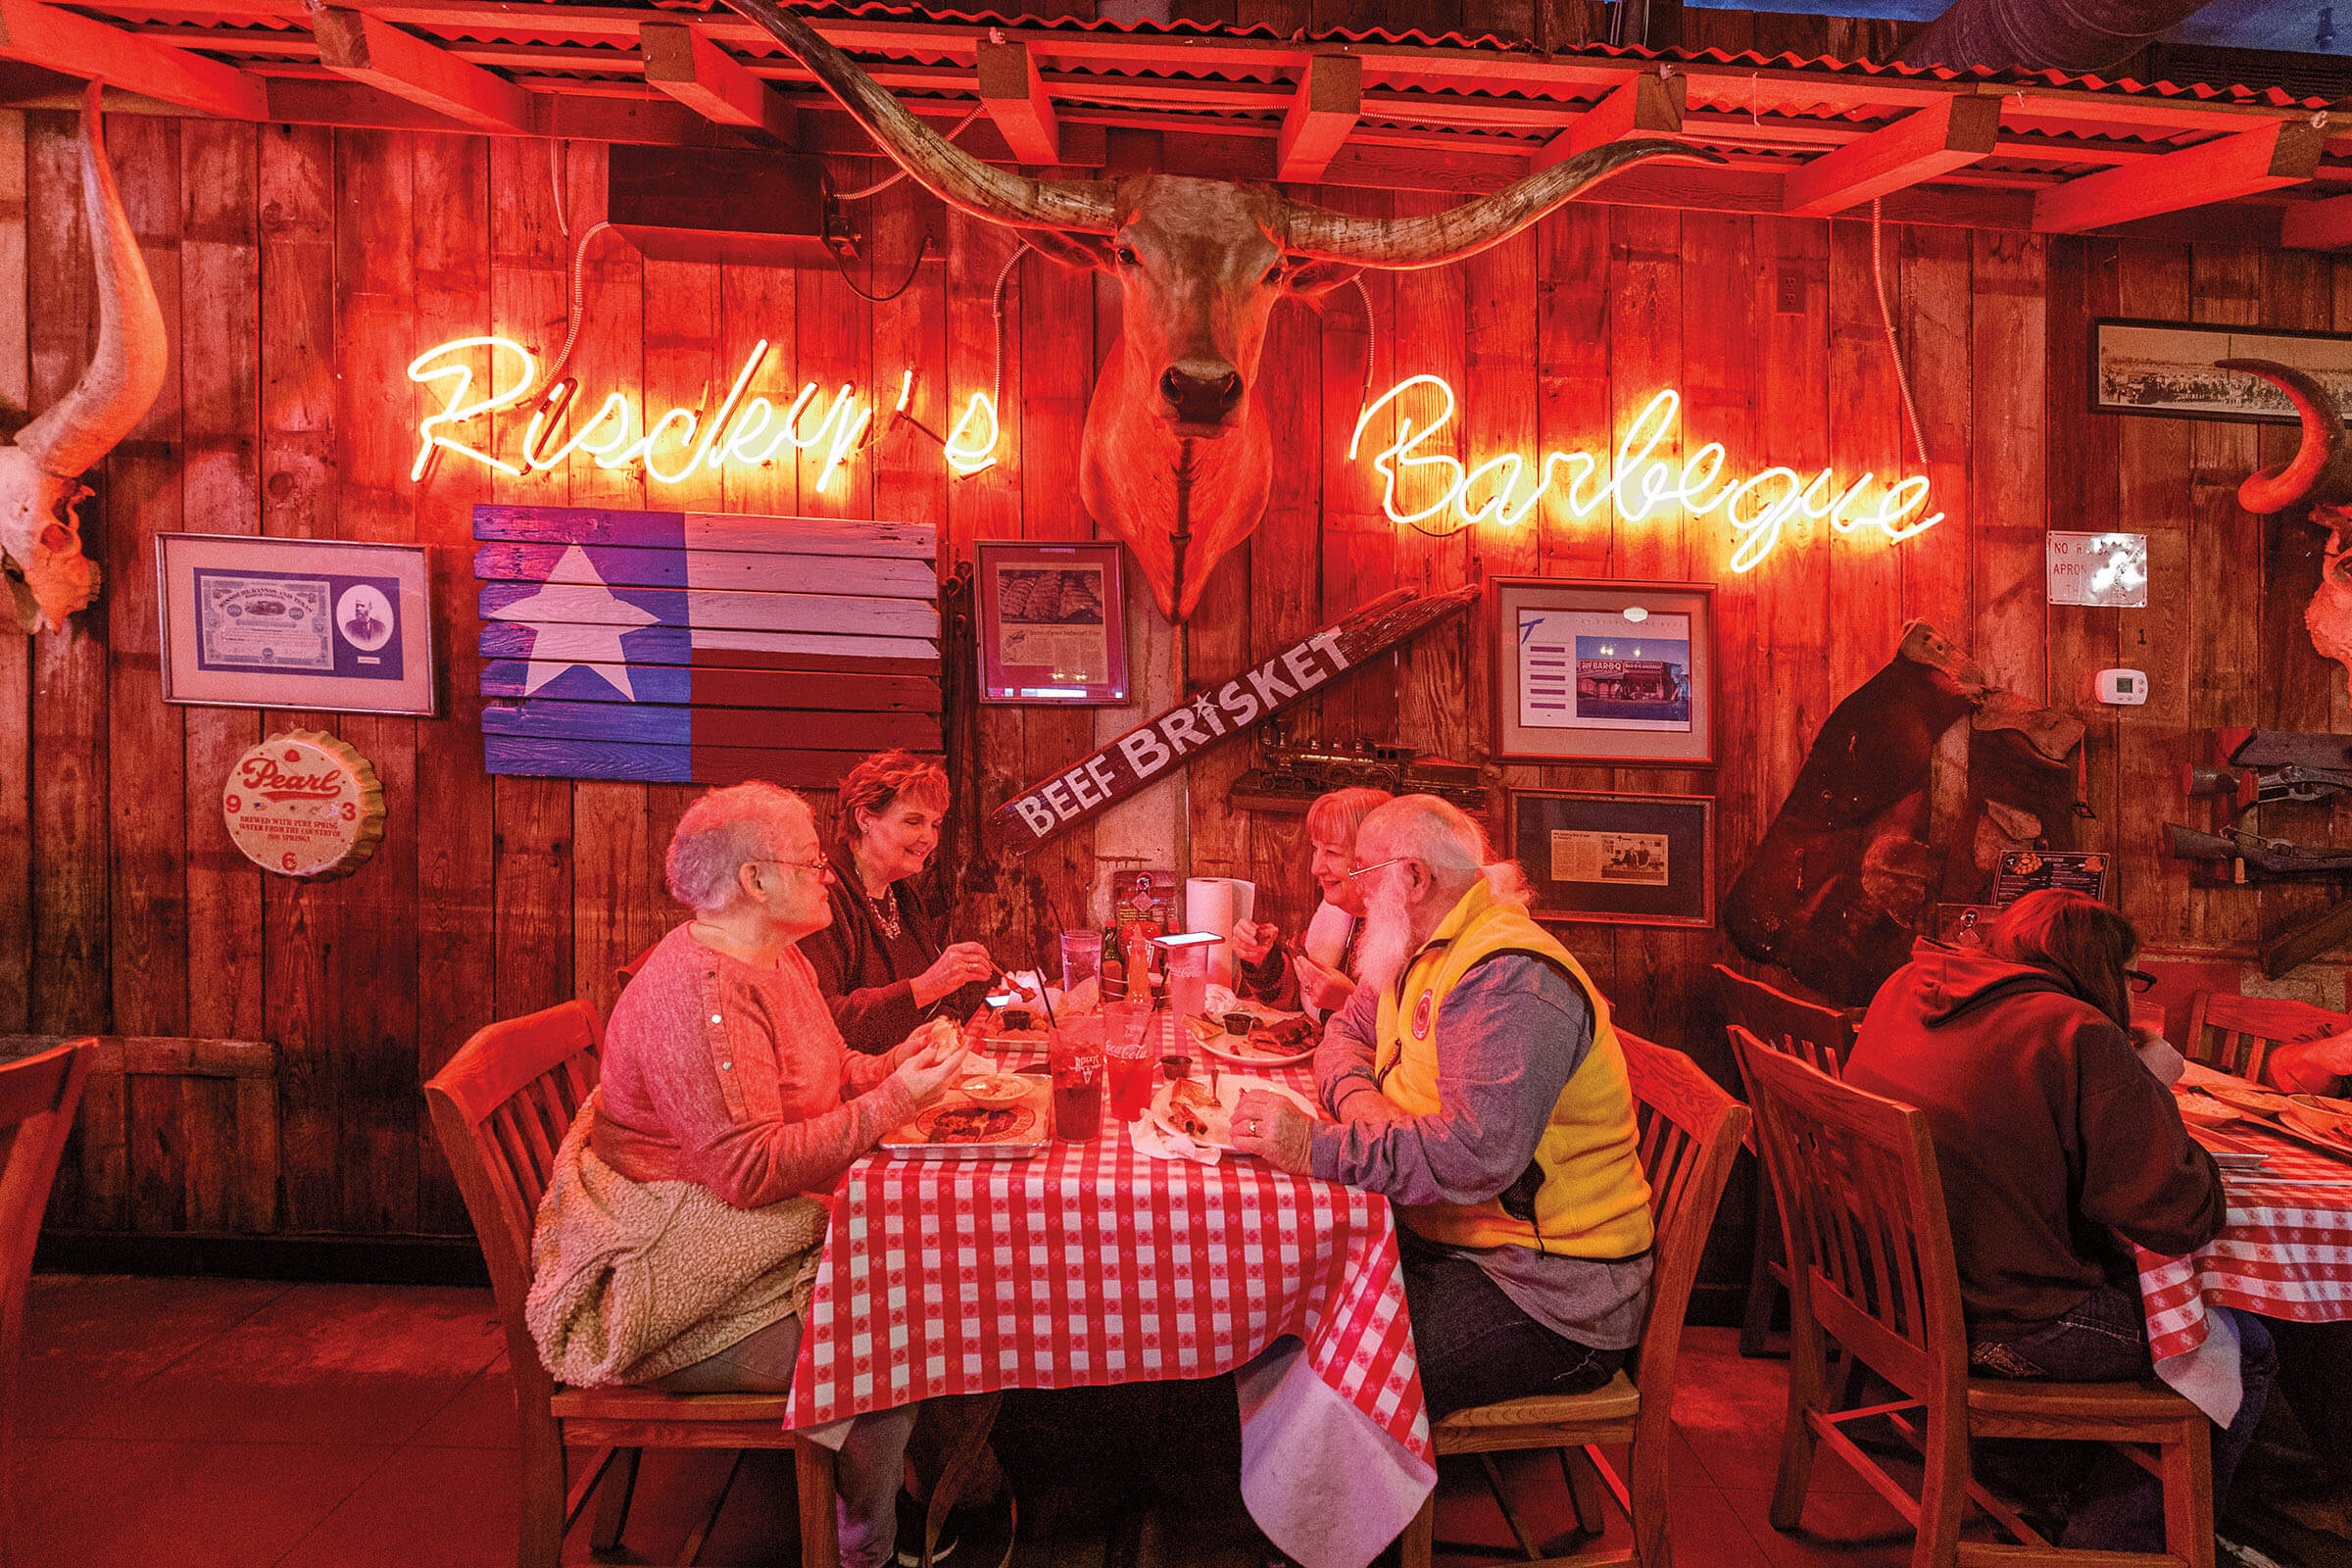 A group of diners eat at a red and white checkered picnic table under a neon sign reading "Riscky's Barbecue" next to a Texas flag